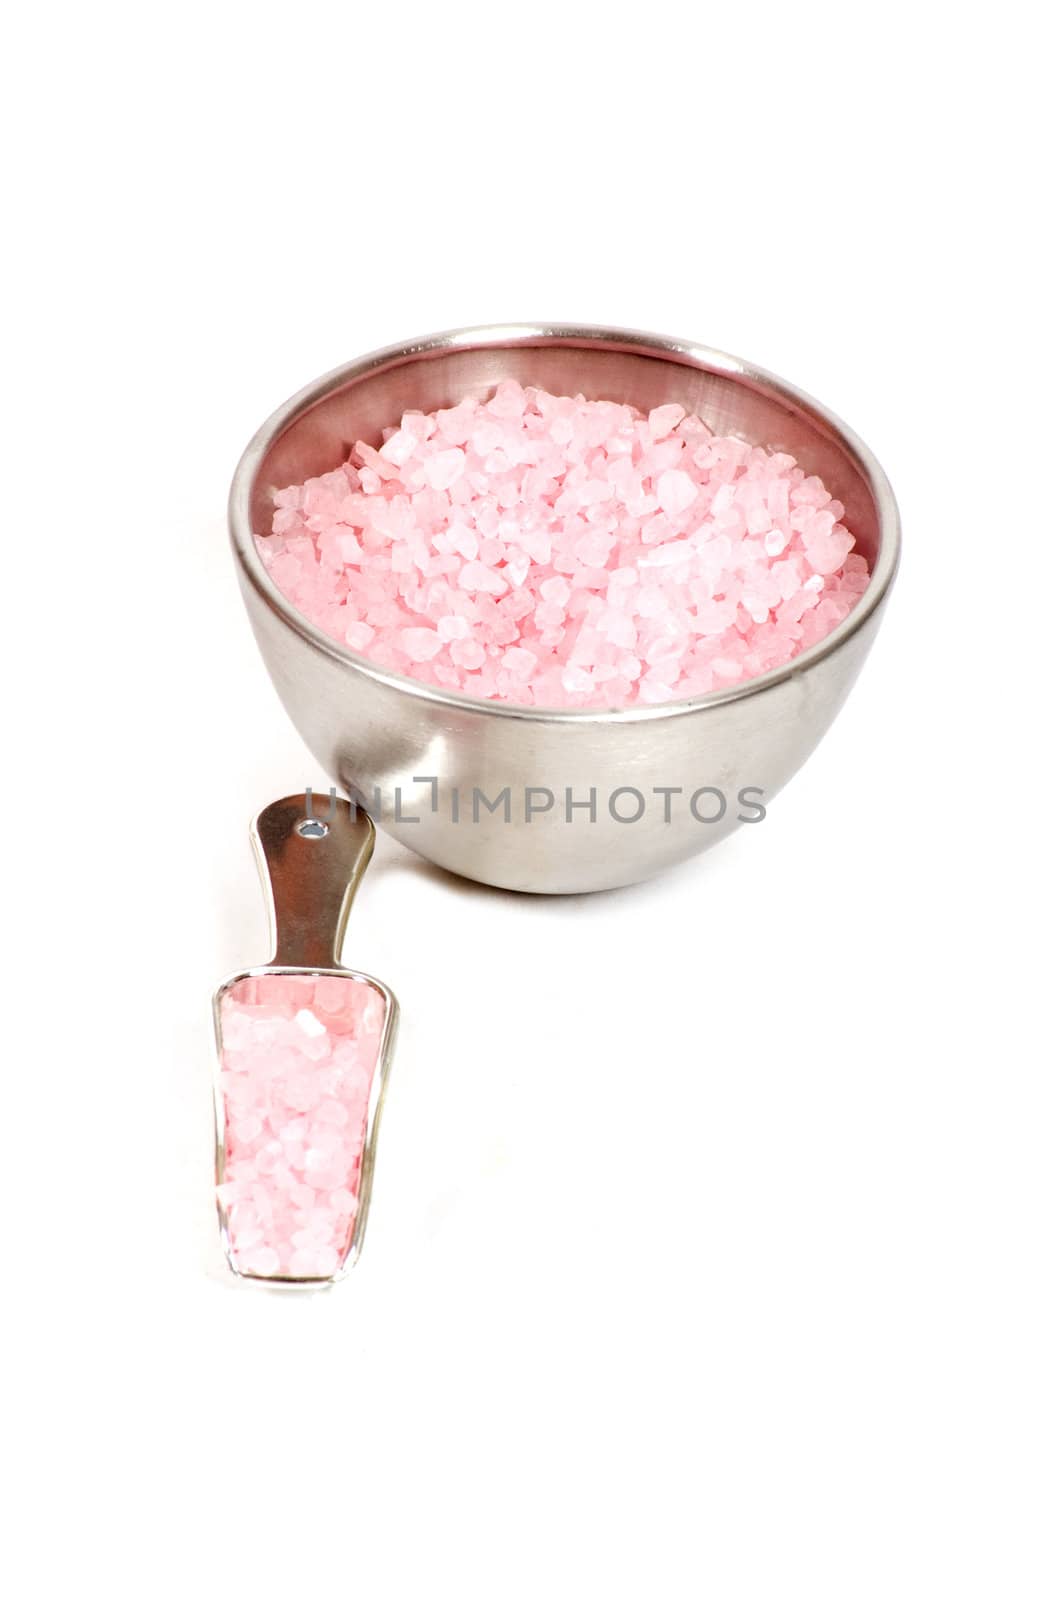 silver bown with bading salt and measuring scoop isolated on white